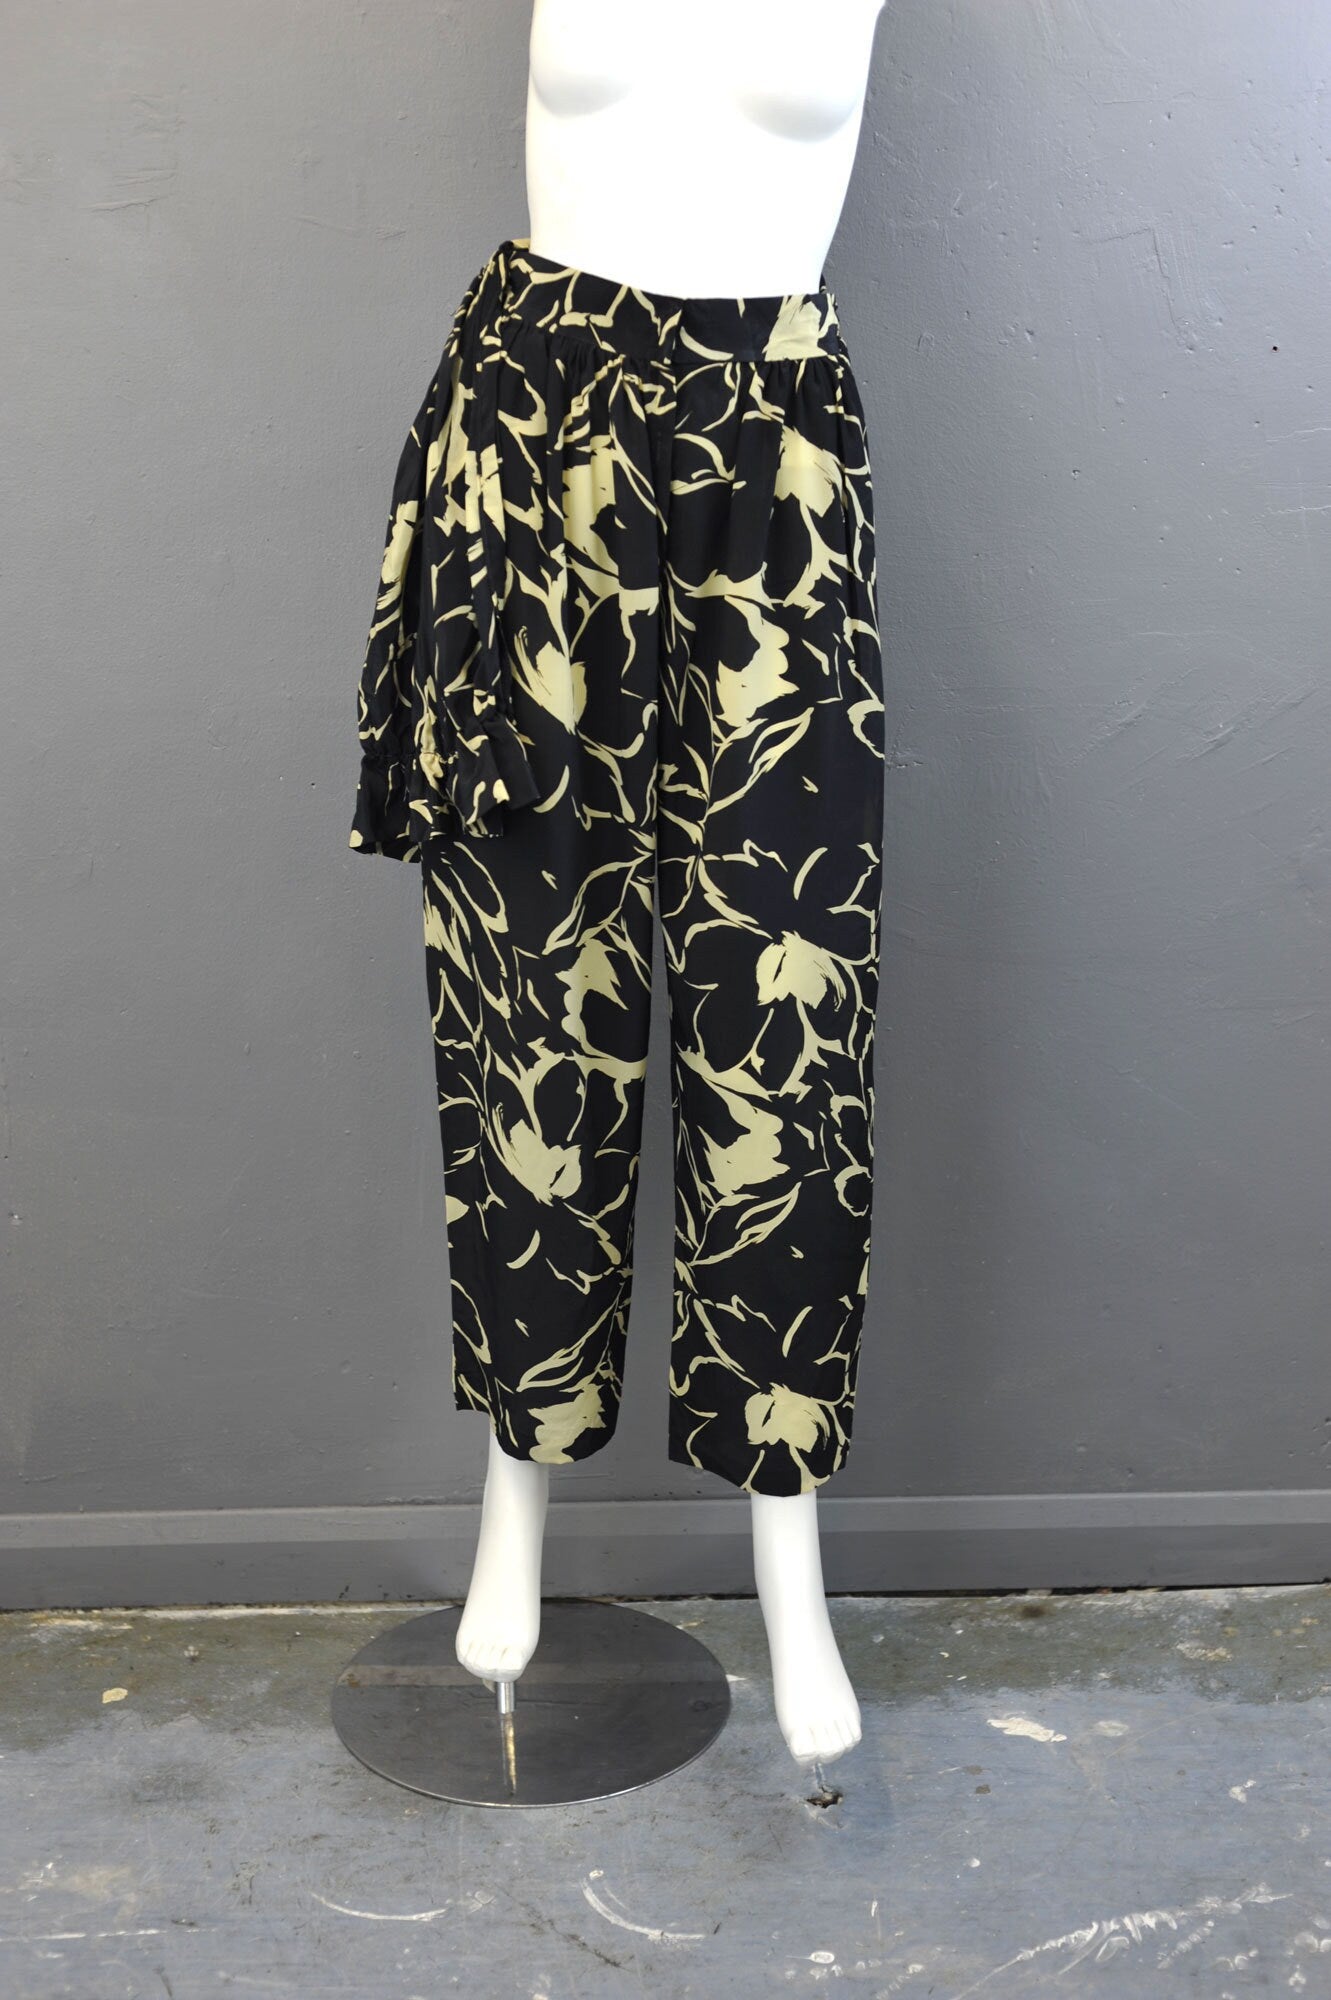 80s Tropical Summer Trousers with Sash Swag, High Waist Loose Fit, Big Flower Print, Size Small